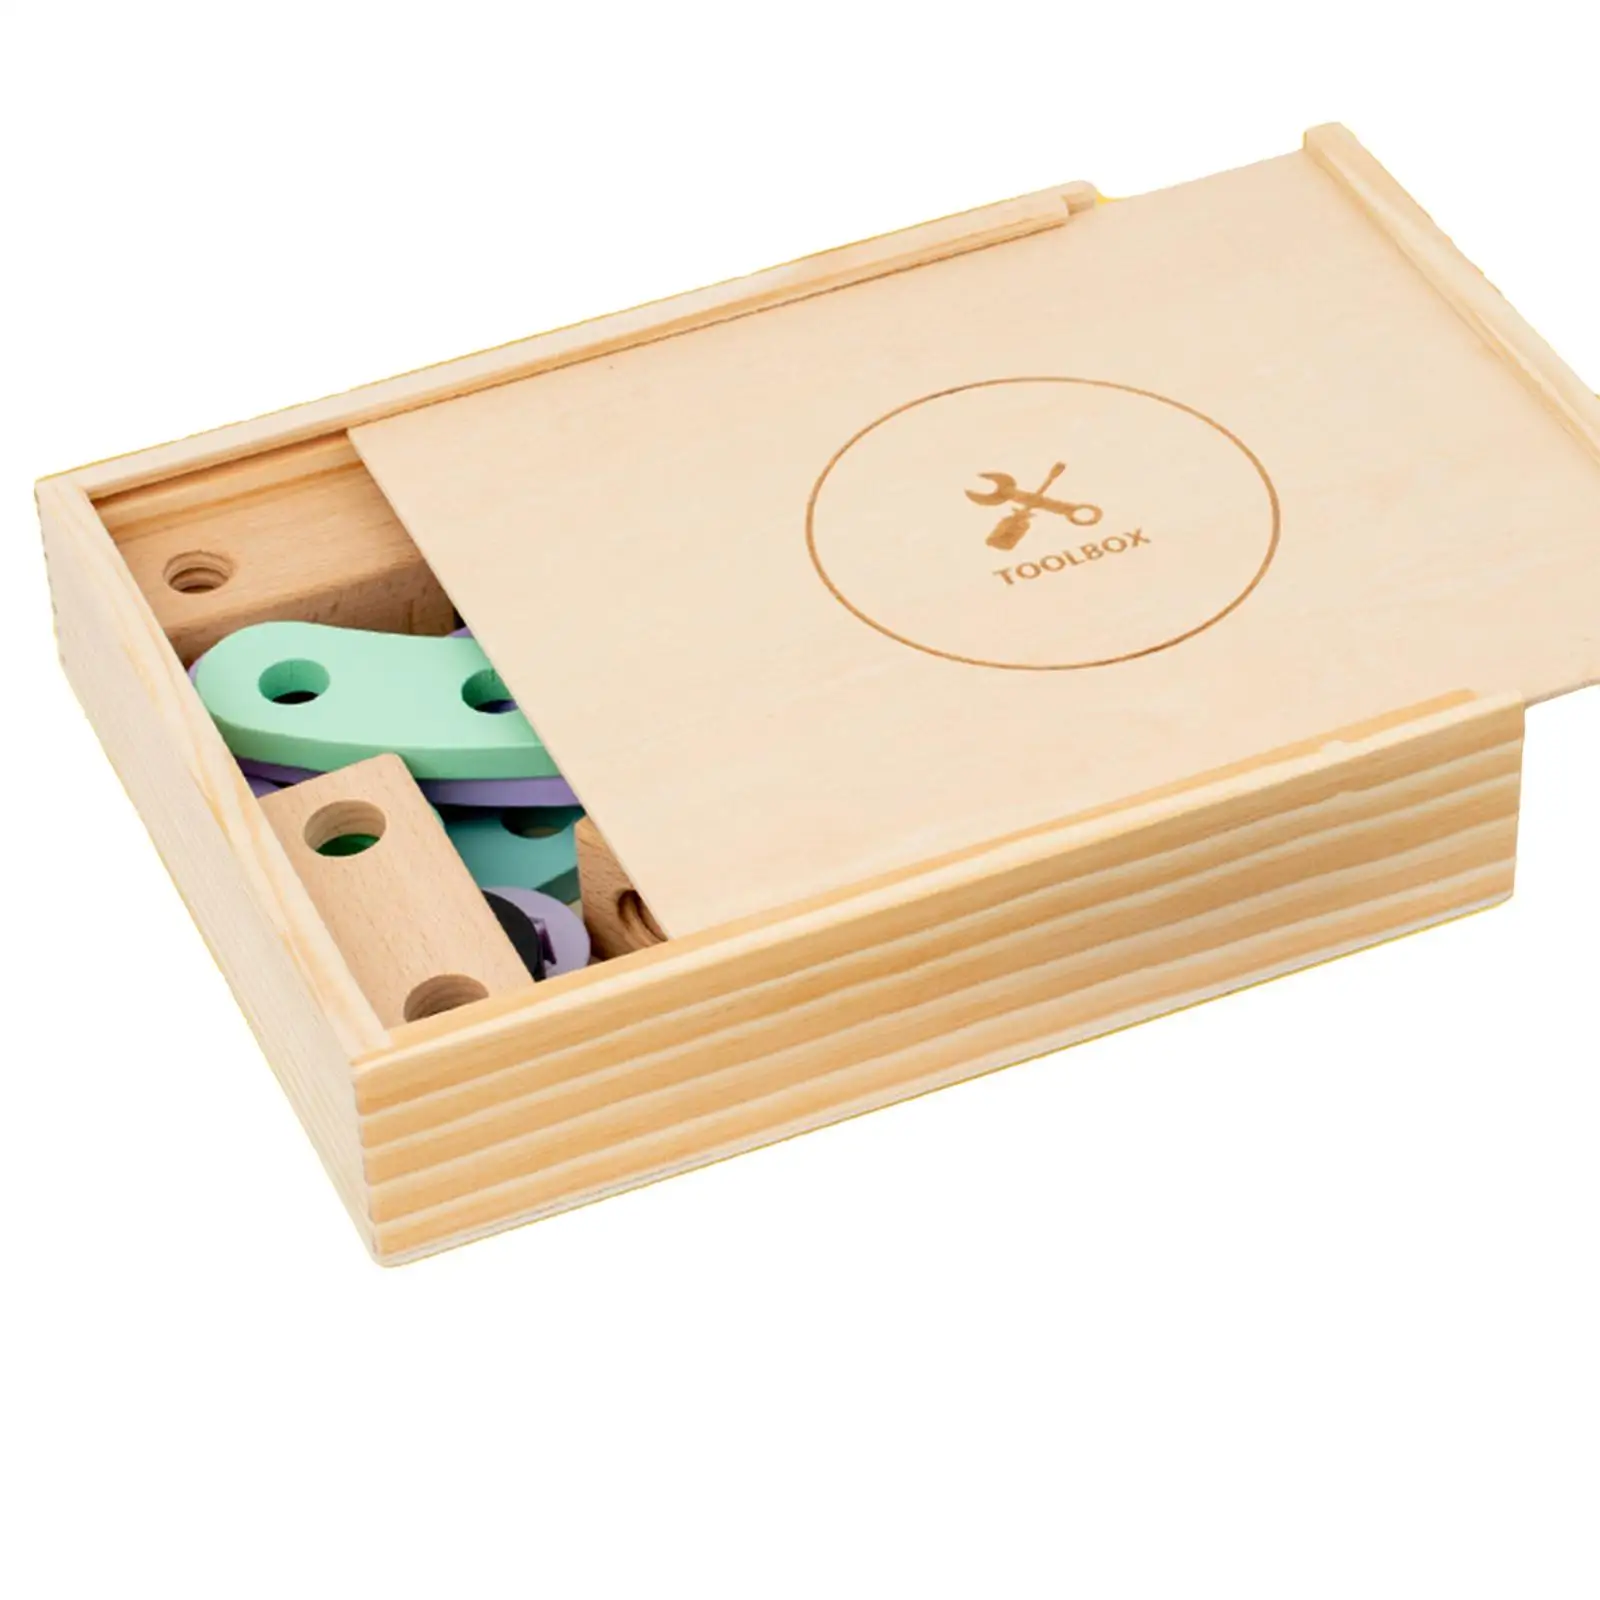 Wooden Repair Tool Box Toy Stem Learning Toys Creative Hand Eye Coordination Sturdy DIY Montessori for Teens Kids Baby